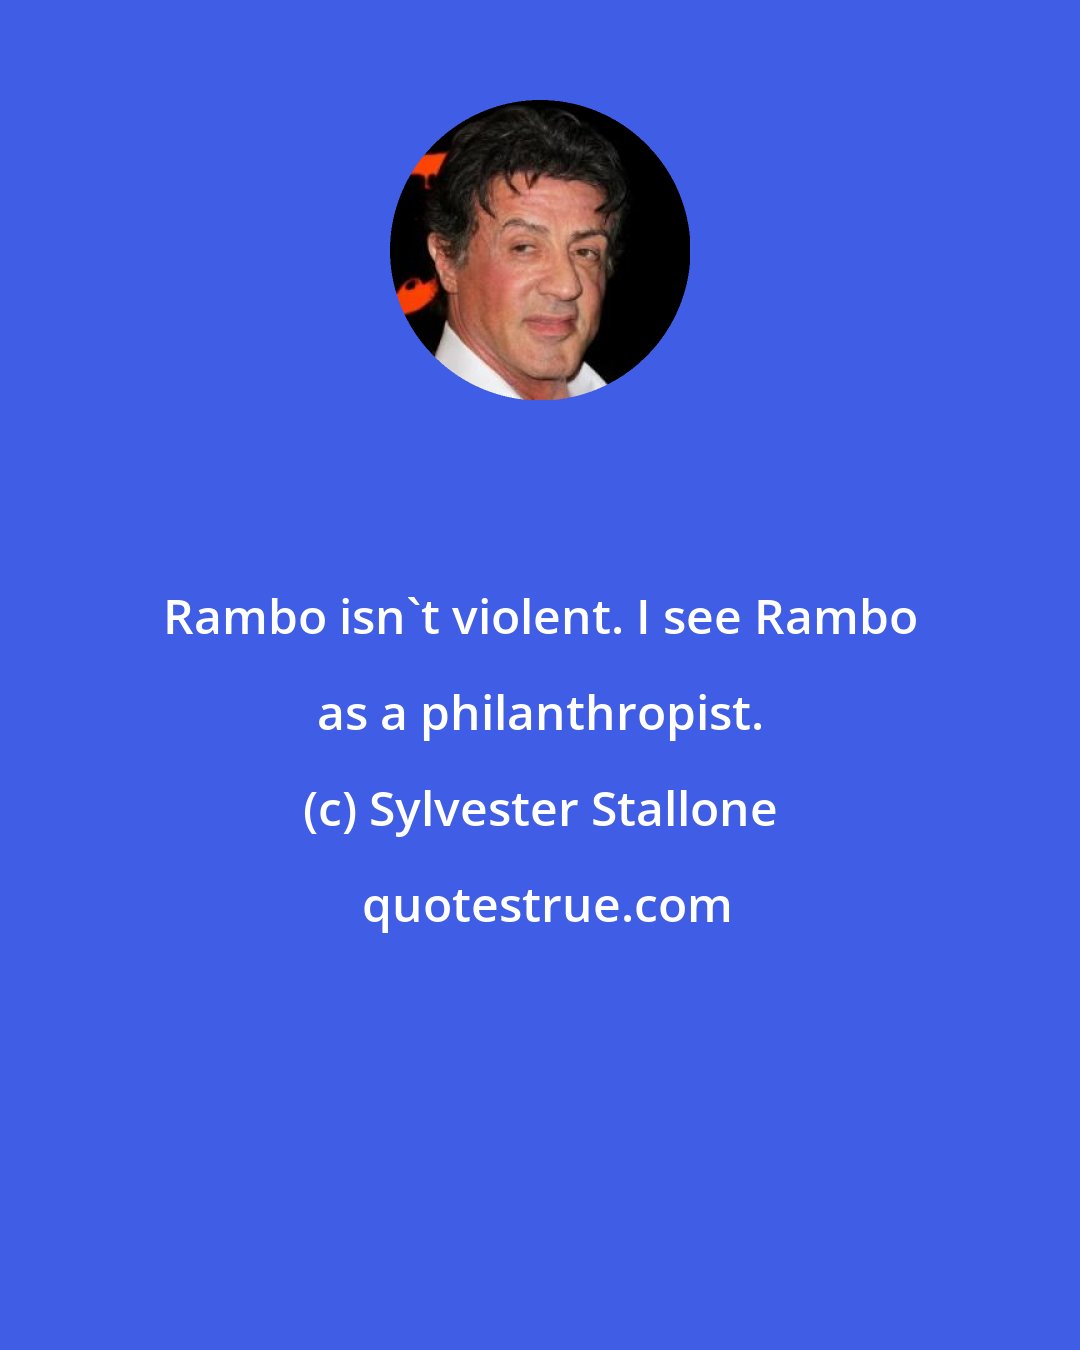 Sylvester Stallone: Rambo isn't violent. I see Rambo as a philanthropist.